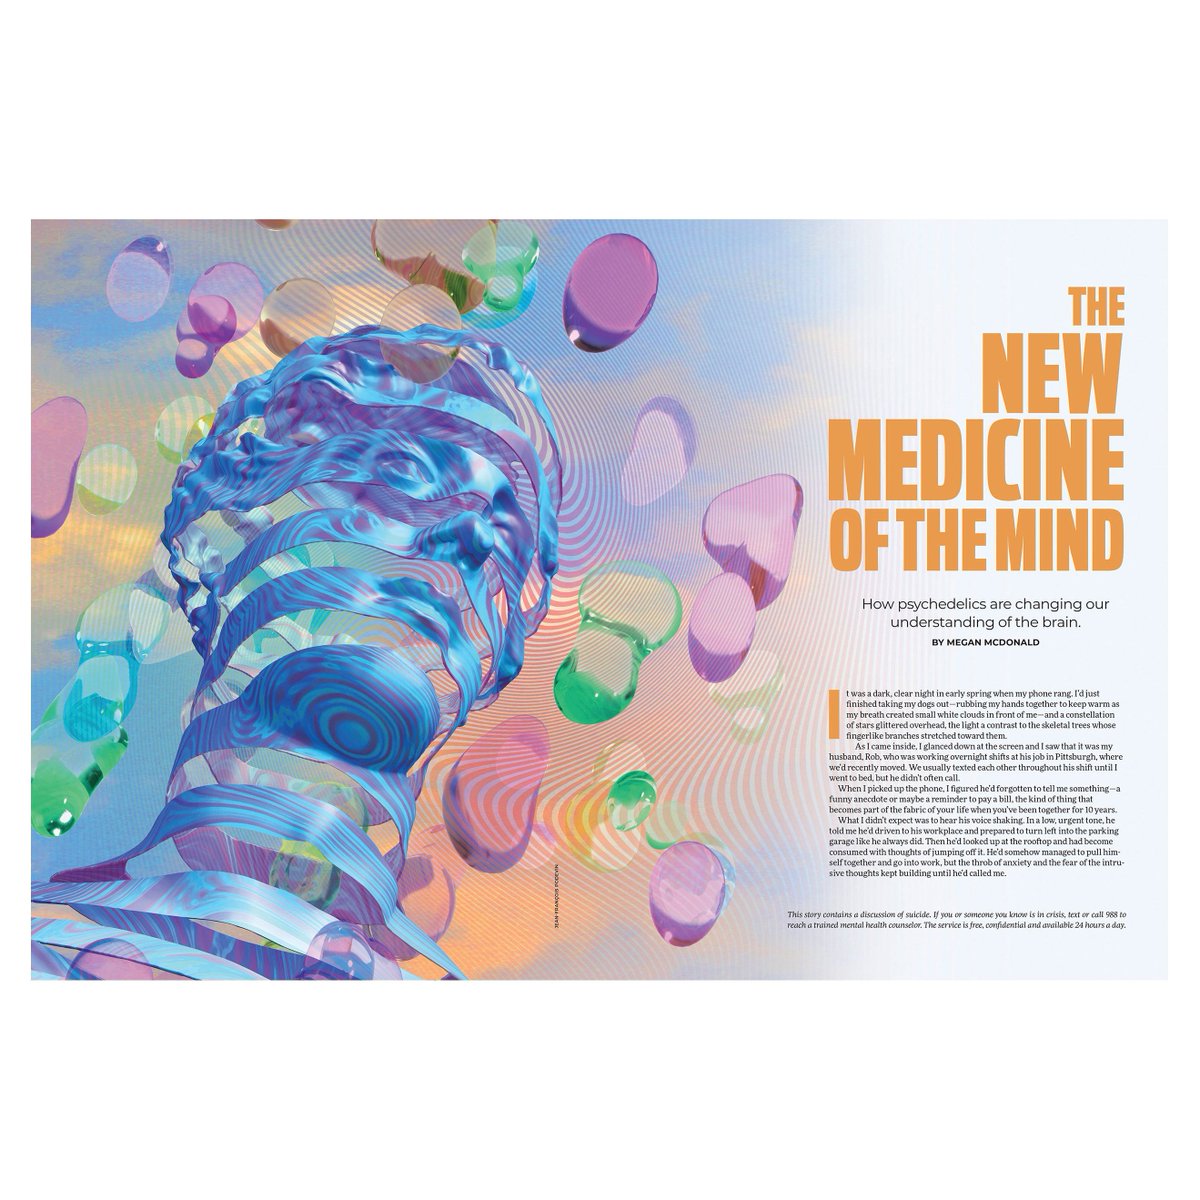 The New Medicine of the Mind 🧠 Jean-Francois Podevin illustrated a recent article in Sarasota Magazine discussing the effects of depression on the brain and how ketamine and other psychedelics are changing mental health care. rappart.com/project/the-ne…